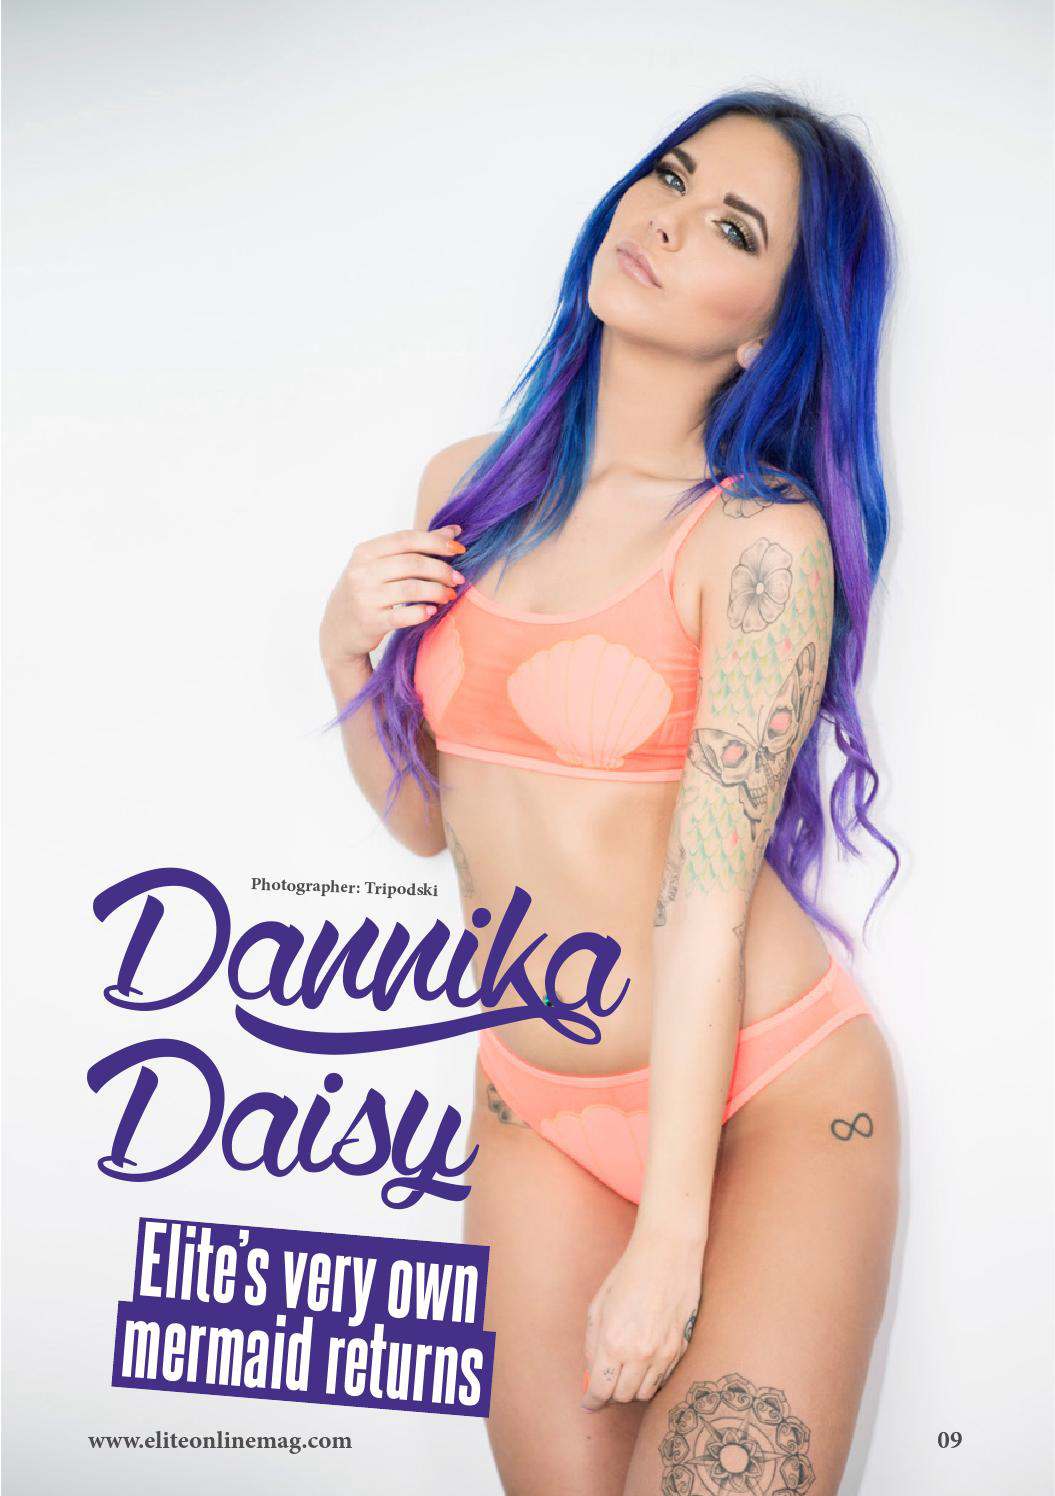 Dannika Daisy In The Pages Of Elite.